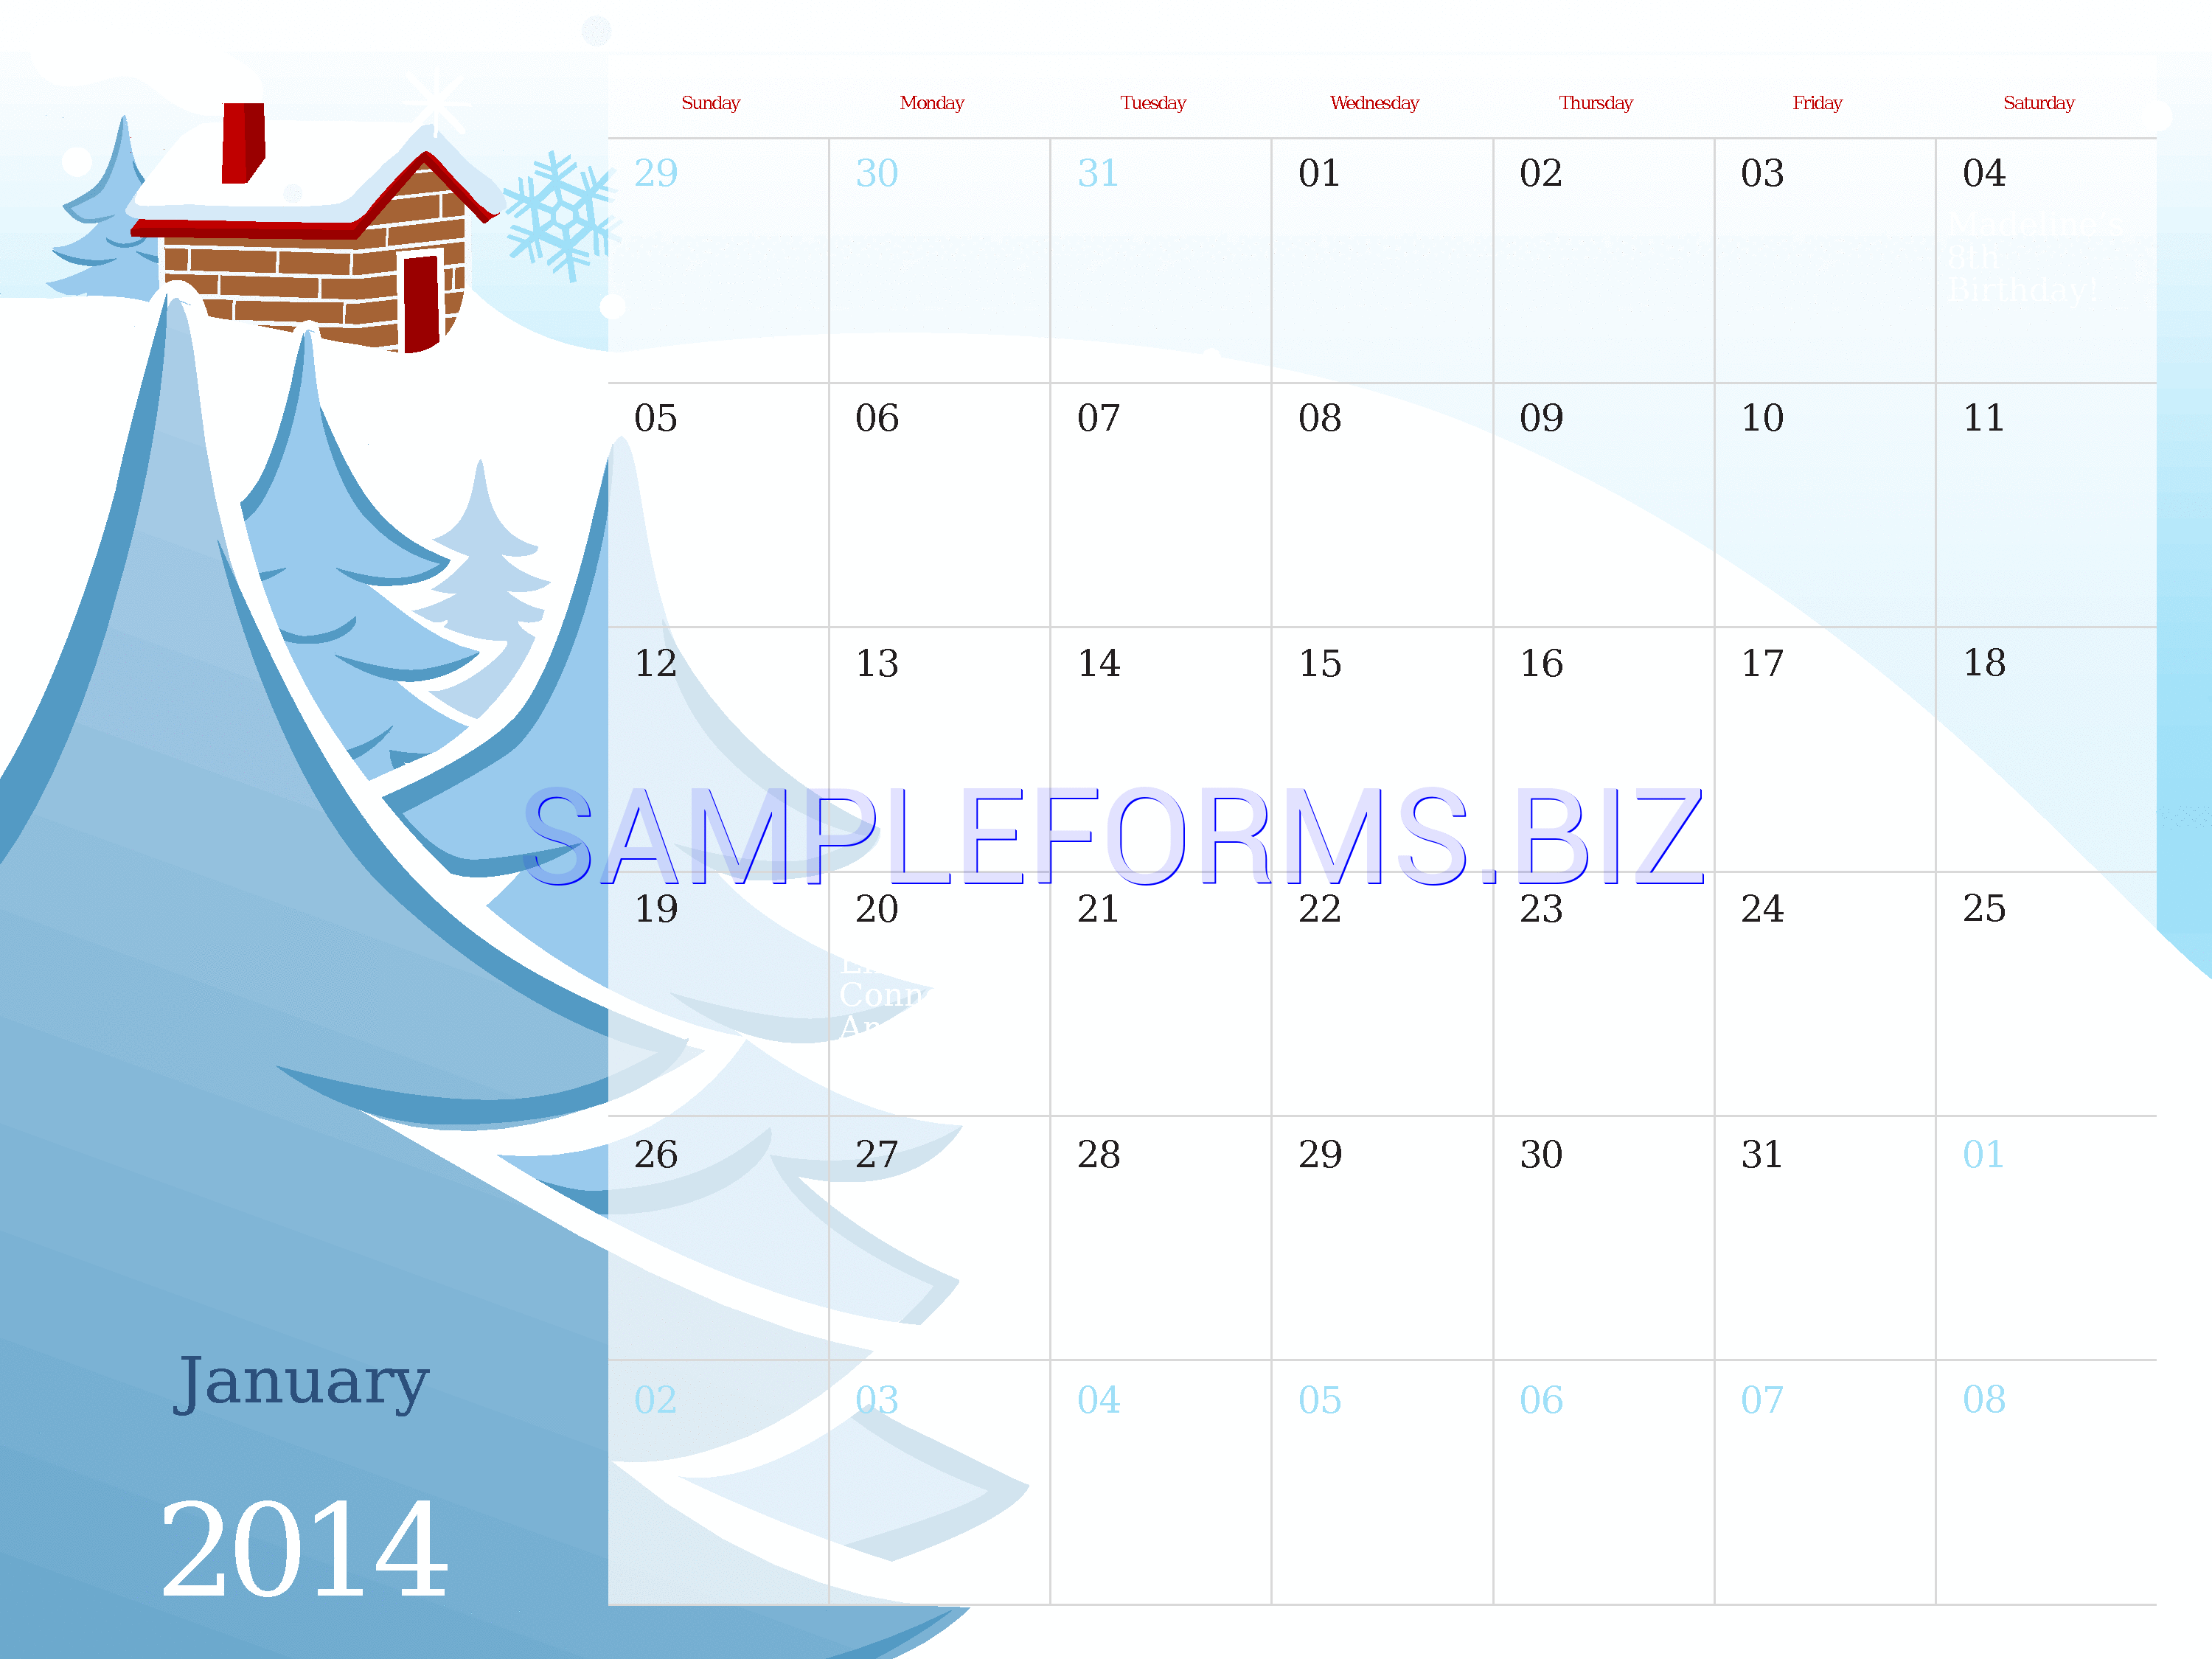 Preview free downloadable 2014 Illustrated Seasonal Calendar (Sun-sat) in PDF (page 1)